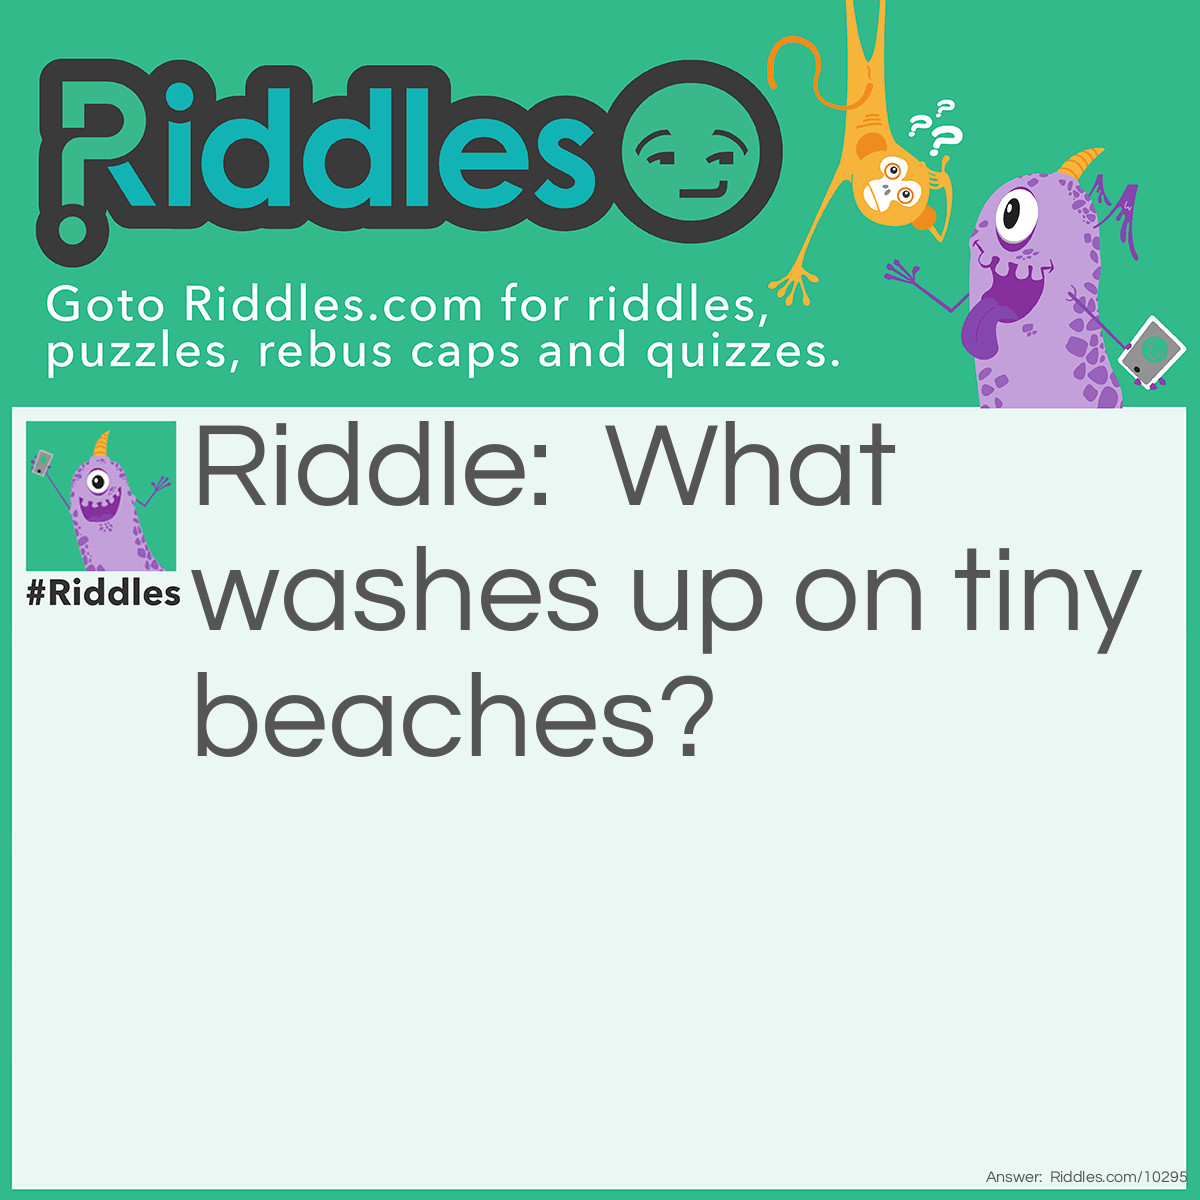 Riddle: What washes up on tiny beaches? Answer: Microwaves.